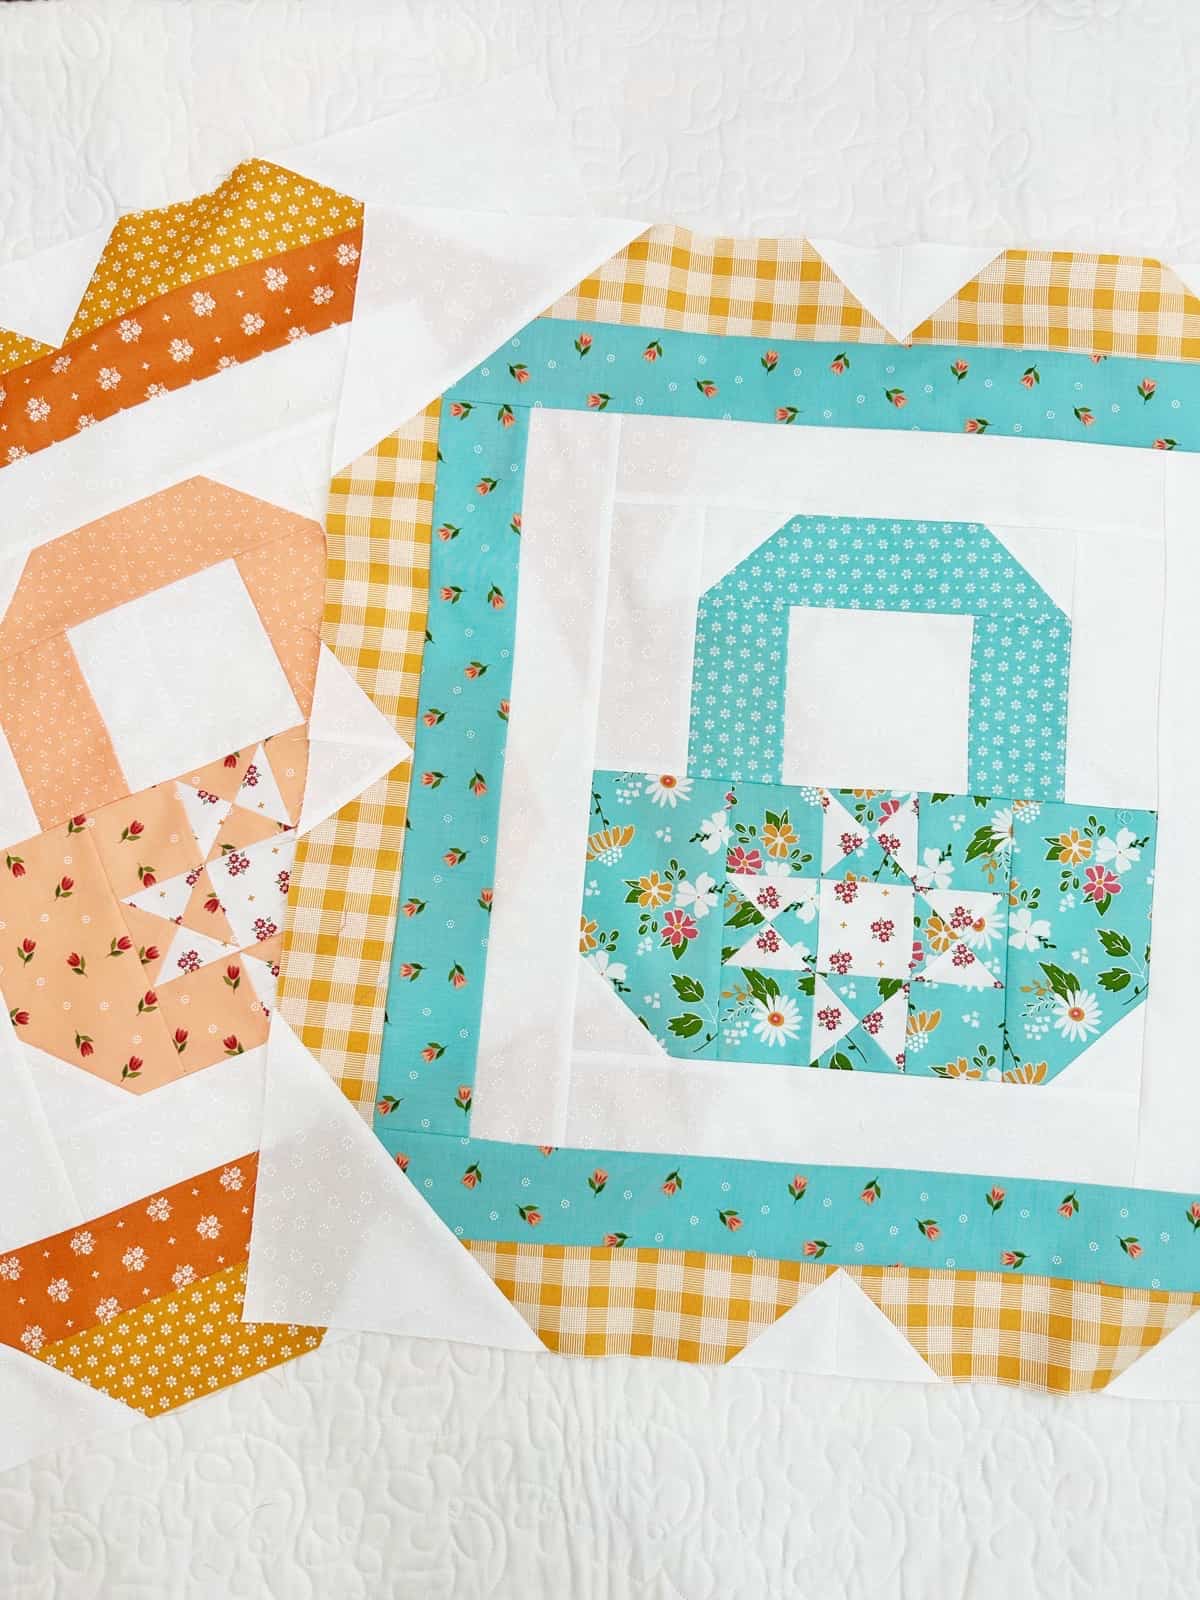 Bountiful Charity Quilt Along Release 3 featured by Top US Quilt Blog, A Quilting Life